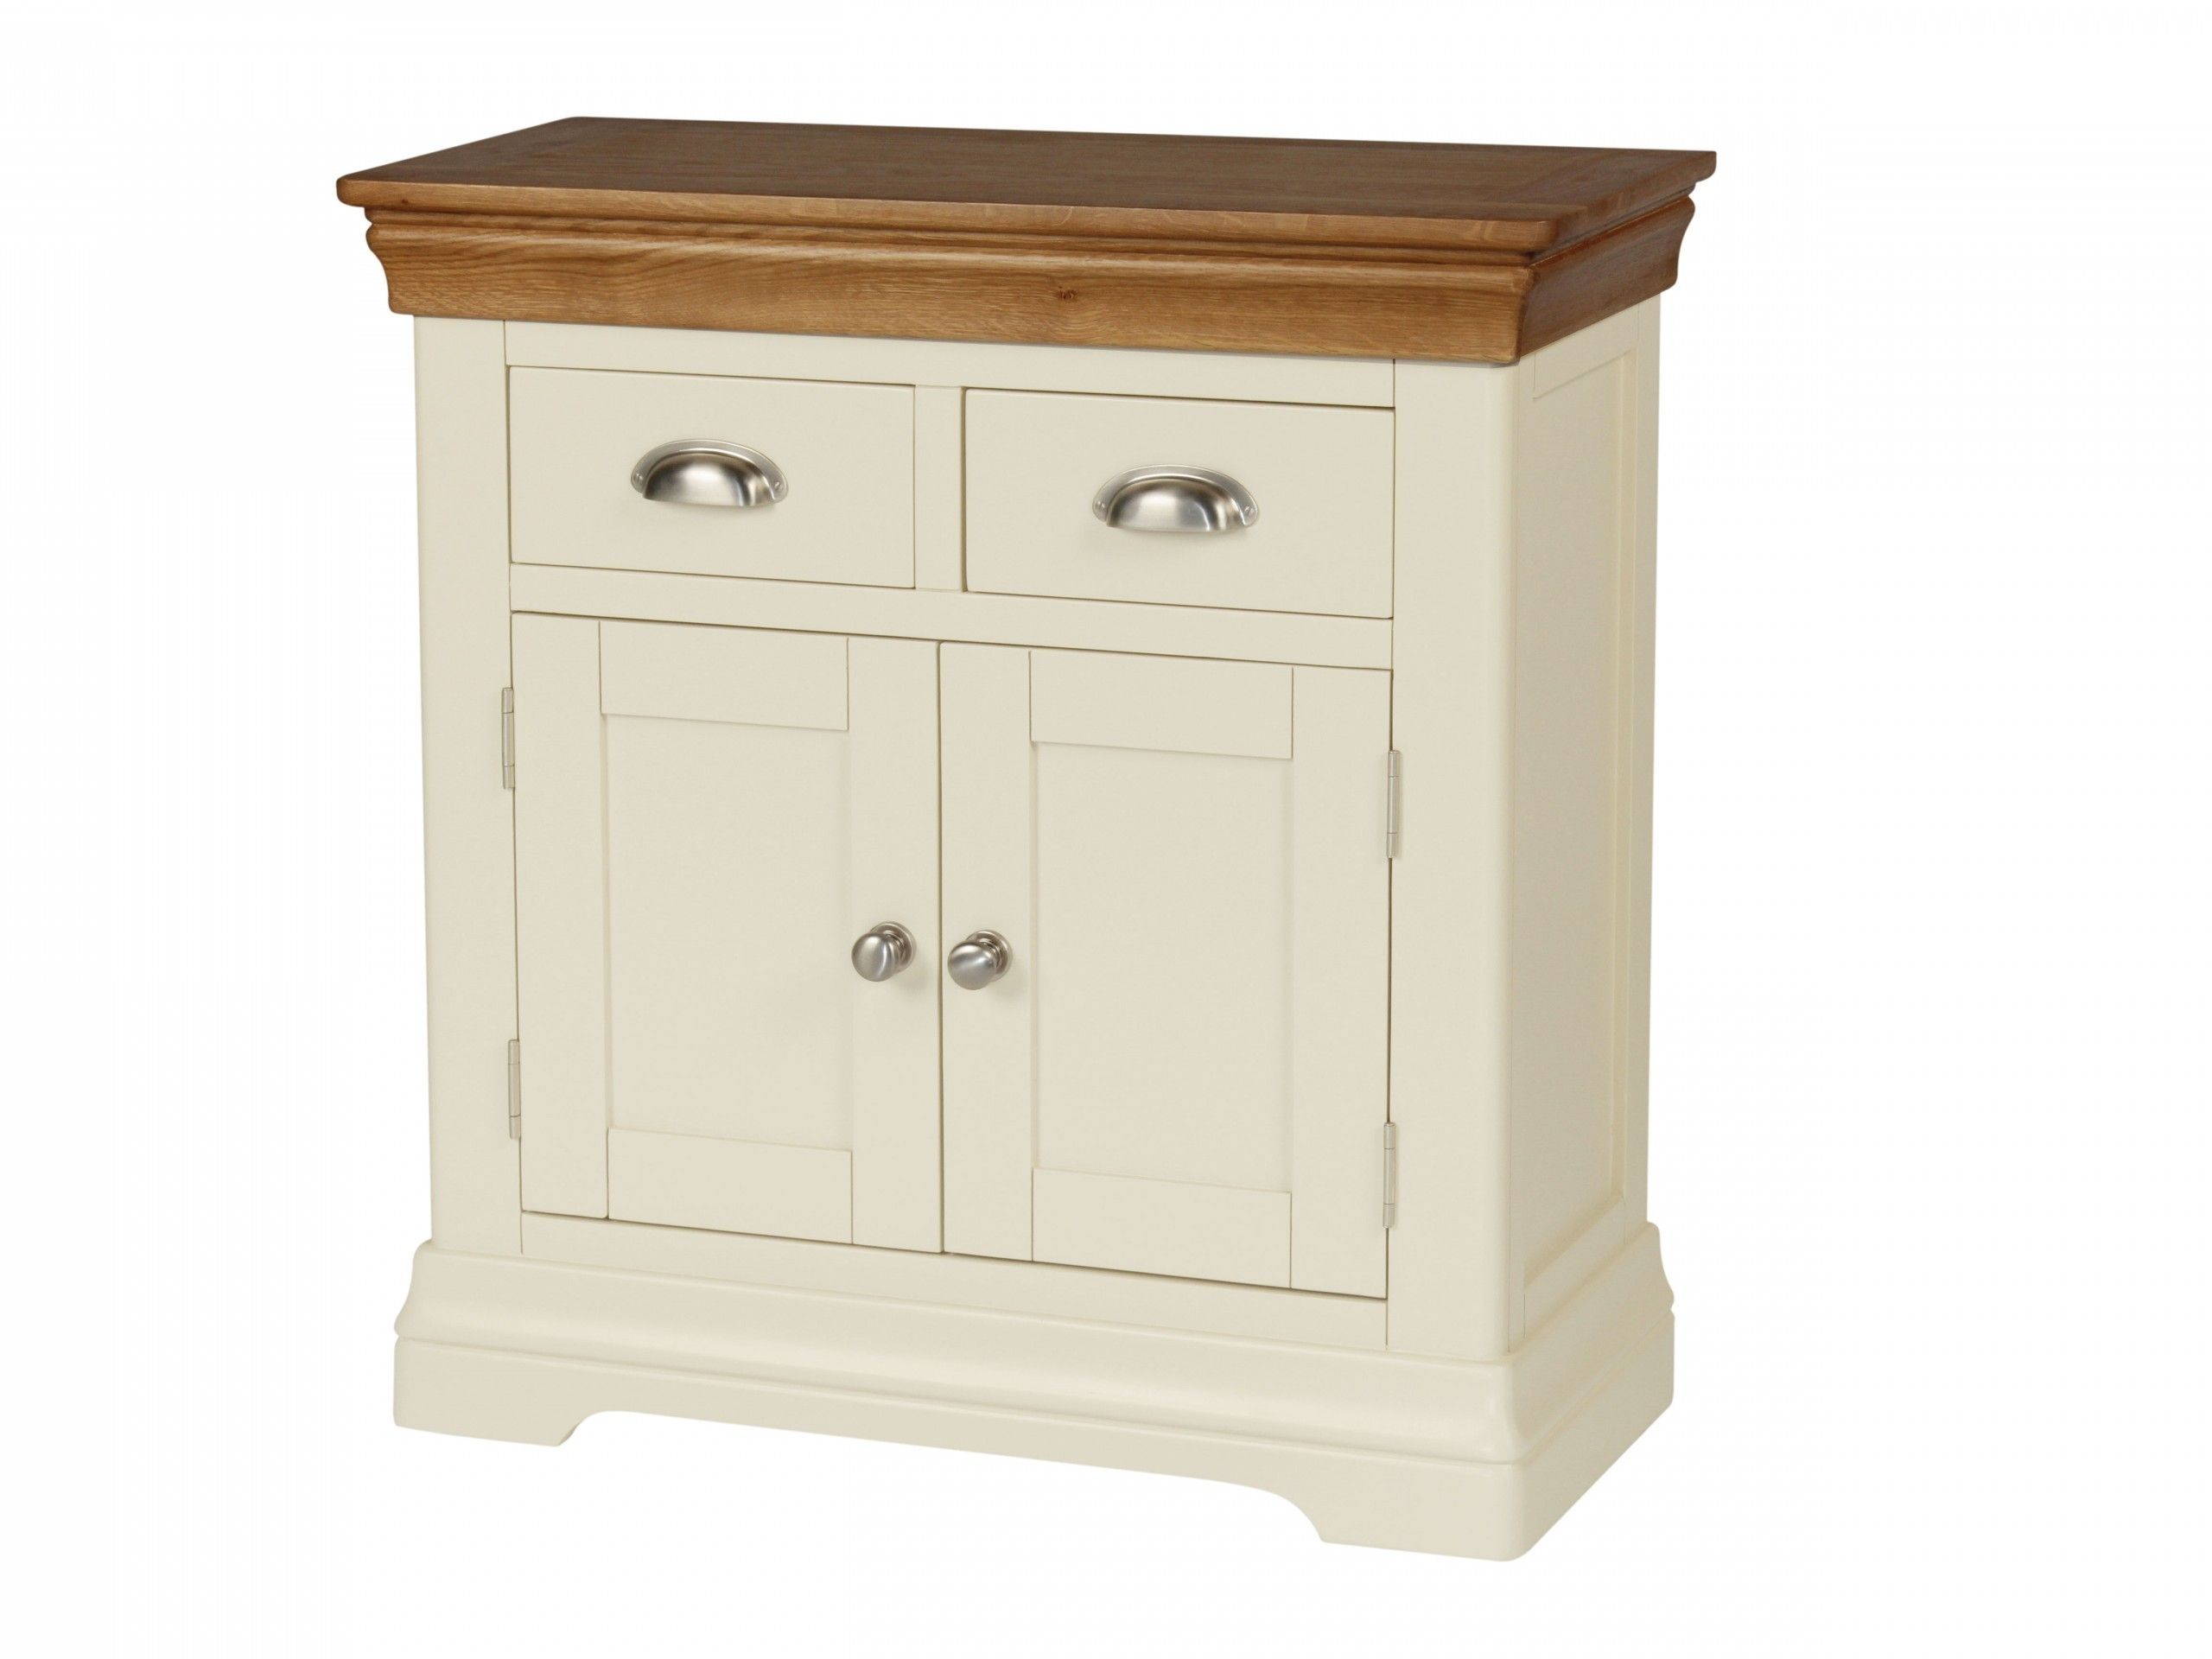 Country Oak Farmhouse 80cm Cream Painted Sideboard | Oak Sideboards In Best And Newest Corrugated White Wash Sideboards (View 8 of 20)